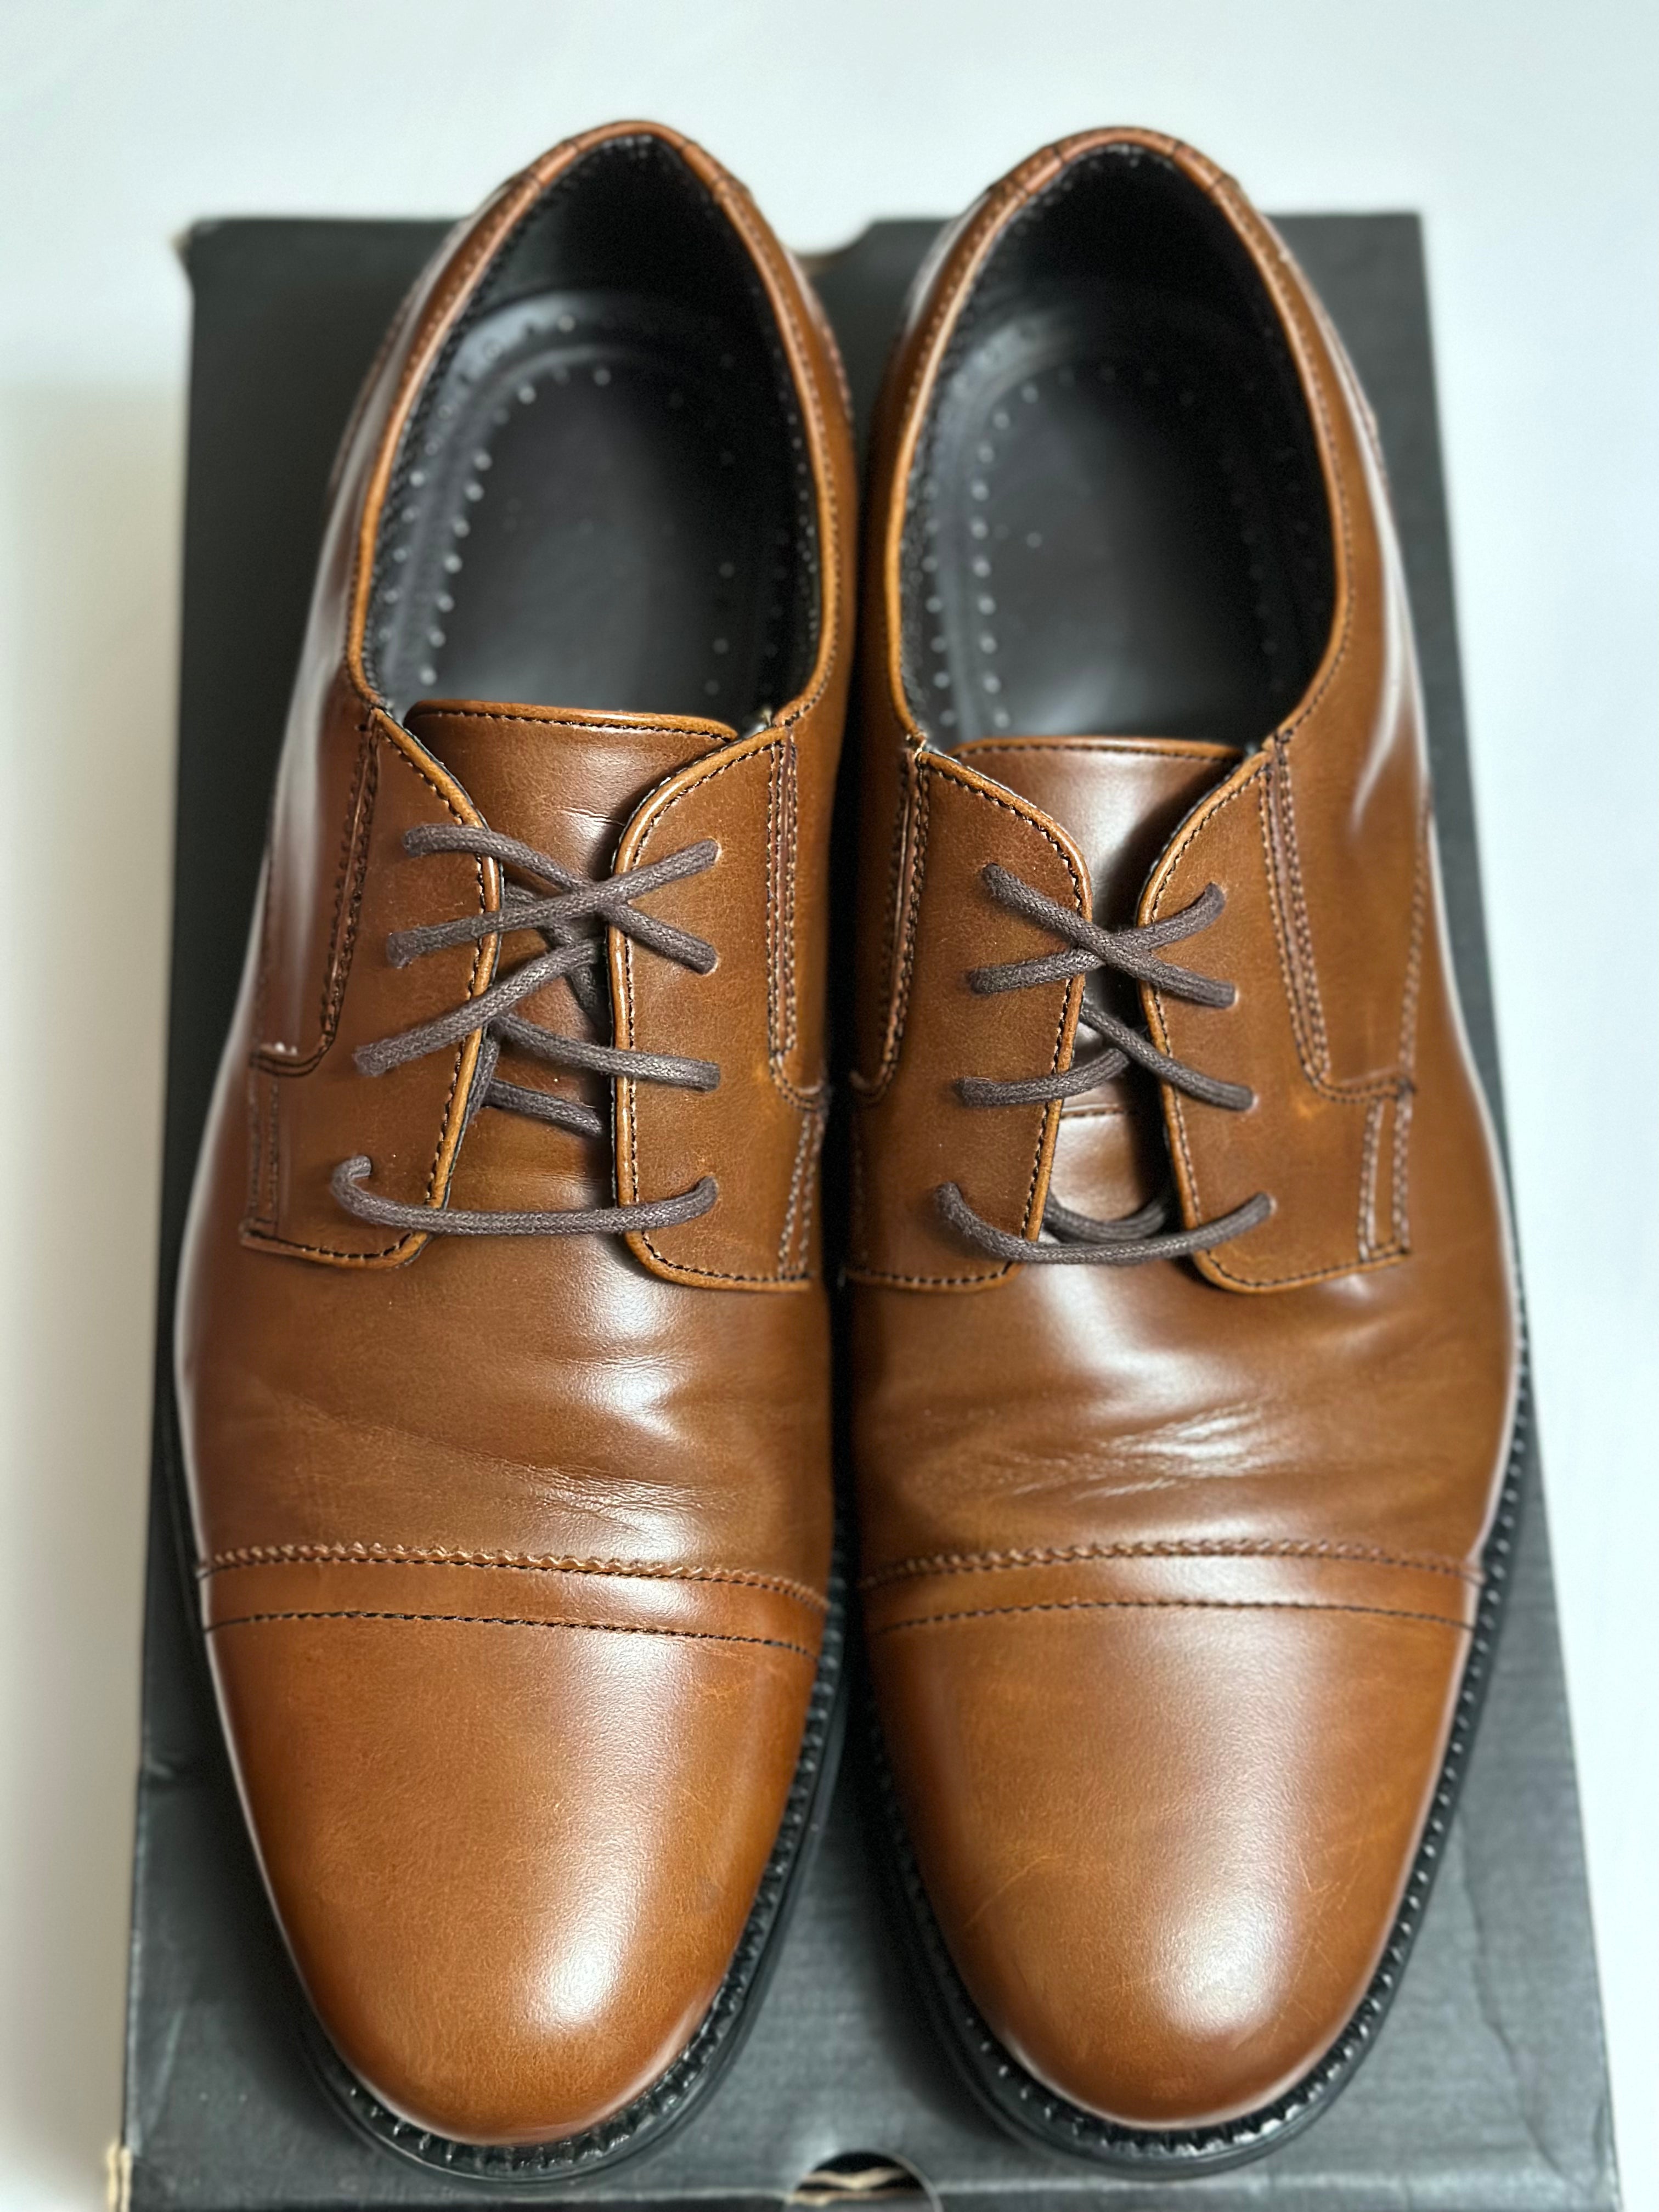 DOCKERS Oxford Brown Dress Shoes in size 11